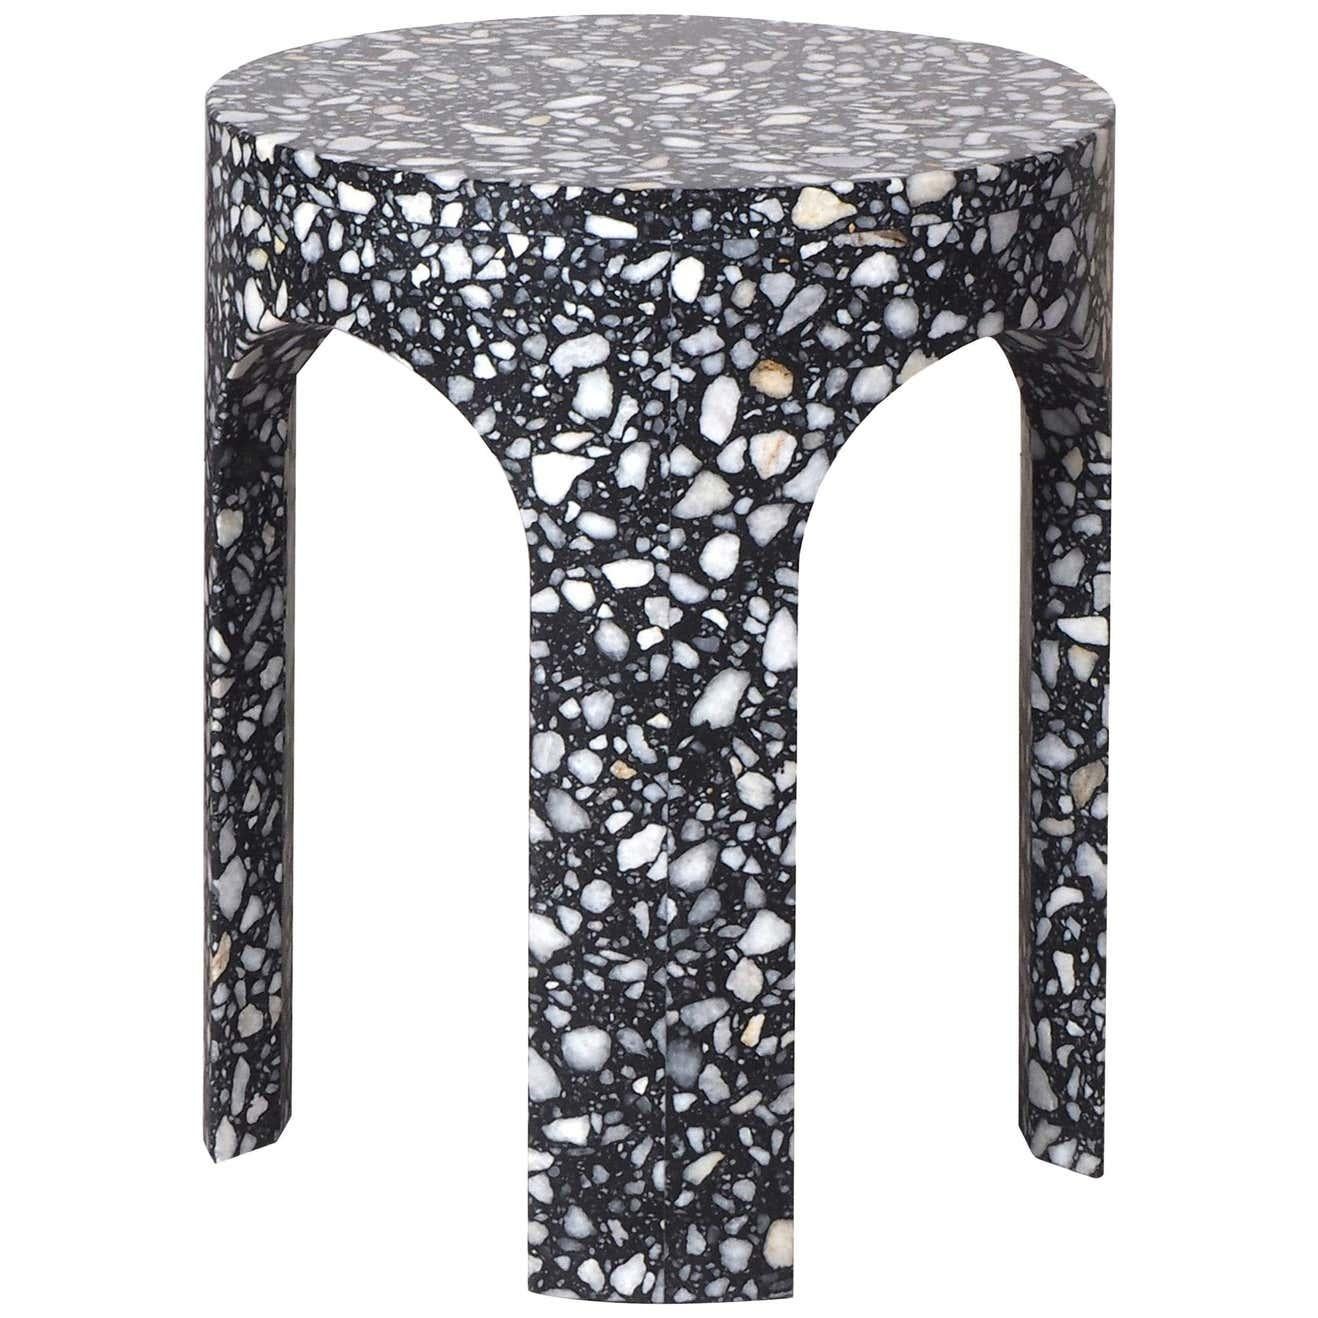 Black Loggia Terrazzo Side Table by Matteo Leorato
Dimensions: Diameter 38 x H 45 cm 
Materials: Terrazzo (Marble and Resin). 
Also available in White. Please contact us for more information. 


An essential element with a strong stylistic